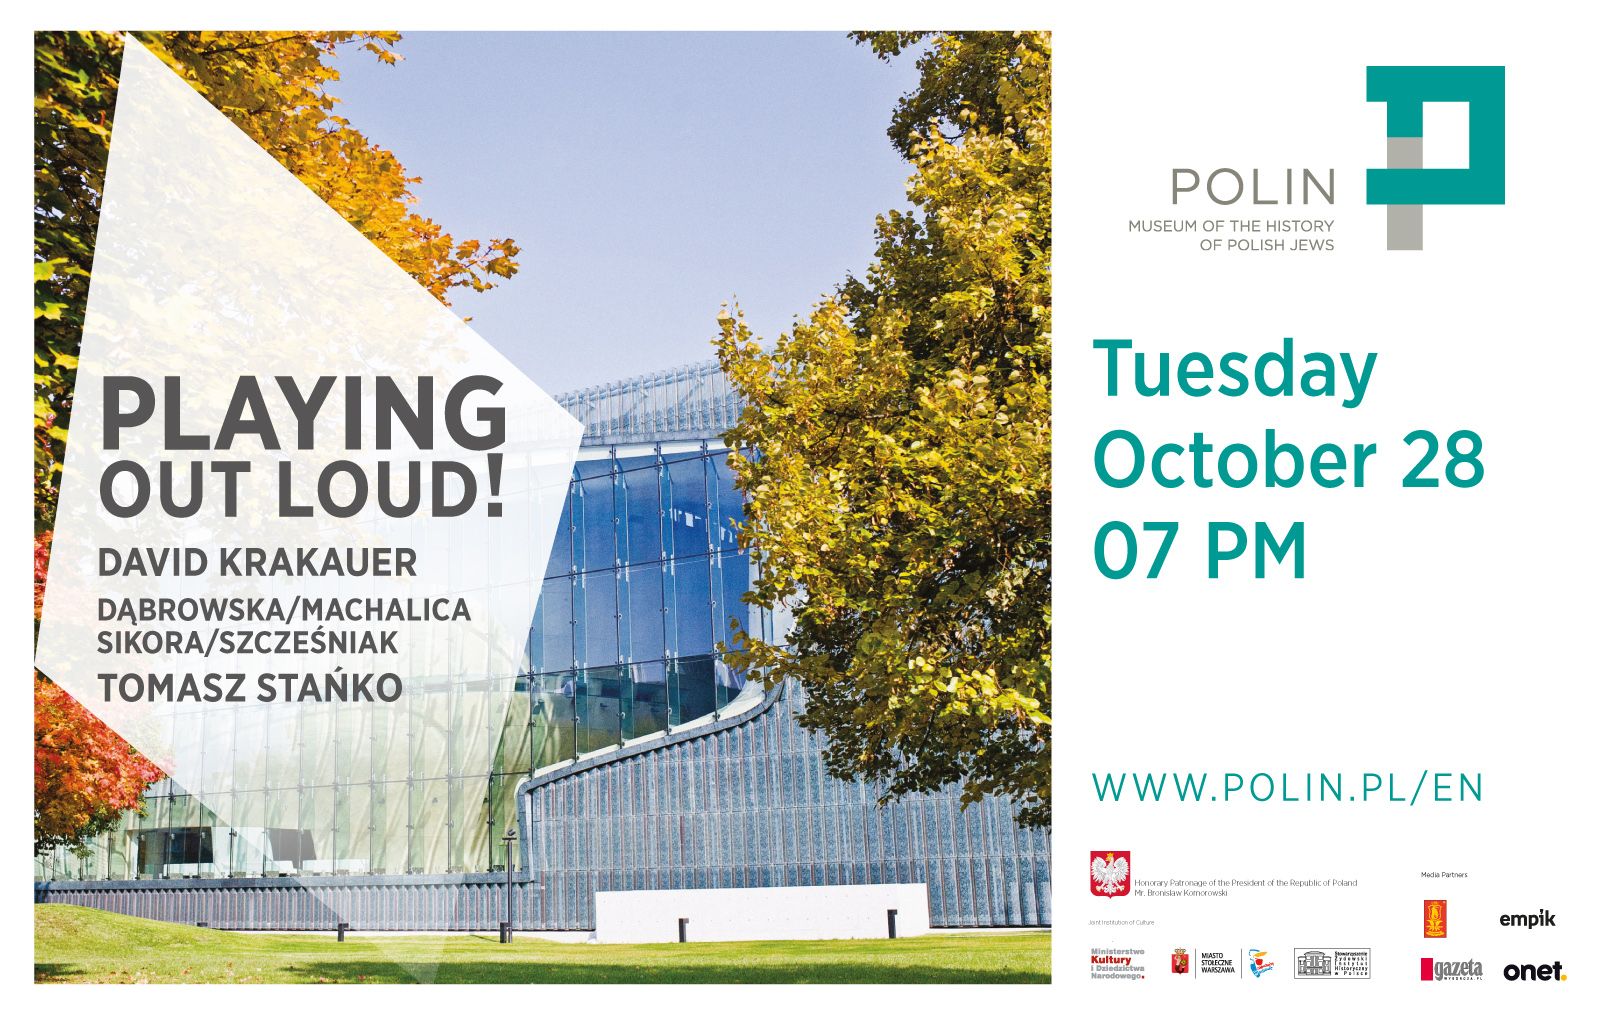 Poster promoting the opening of POLIN Museum in 2014.